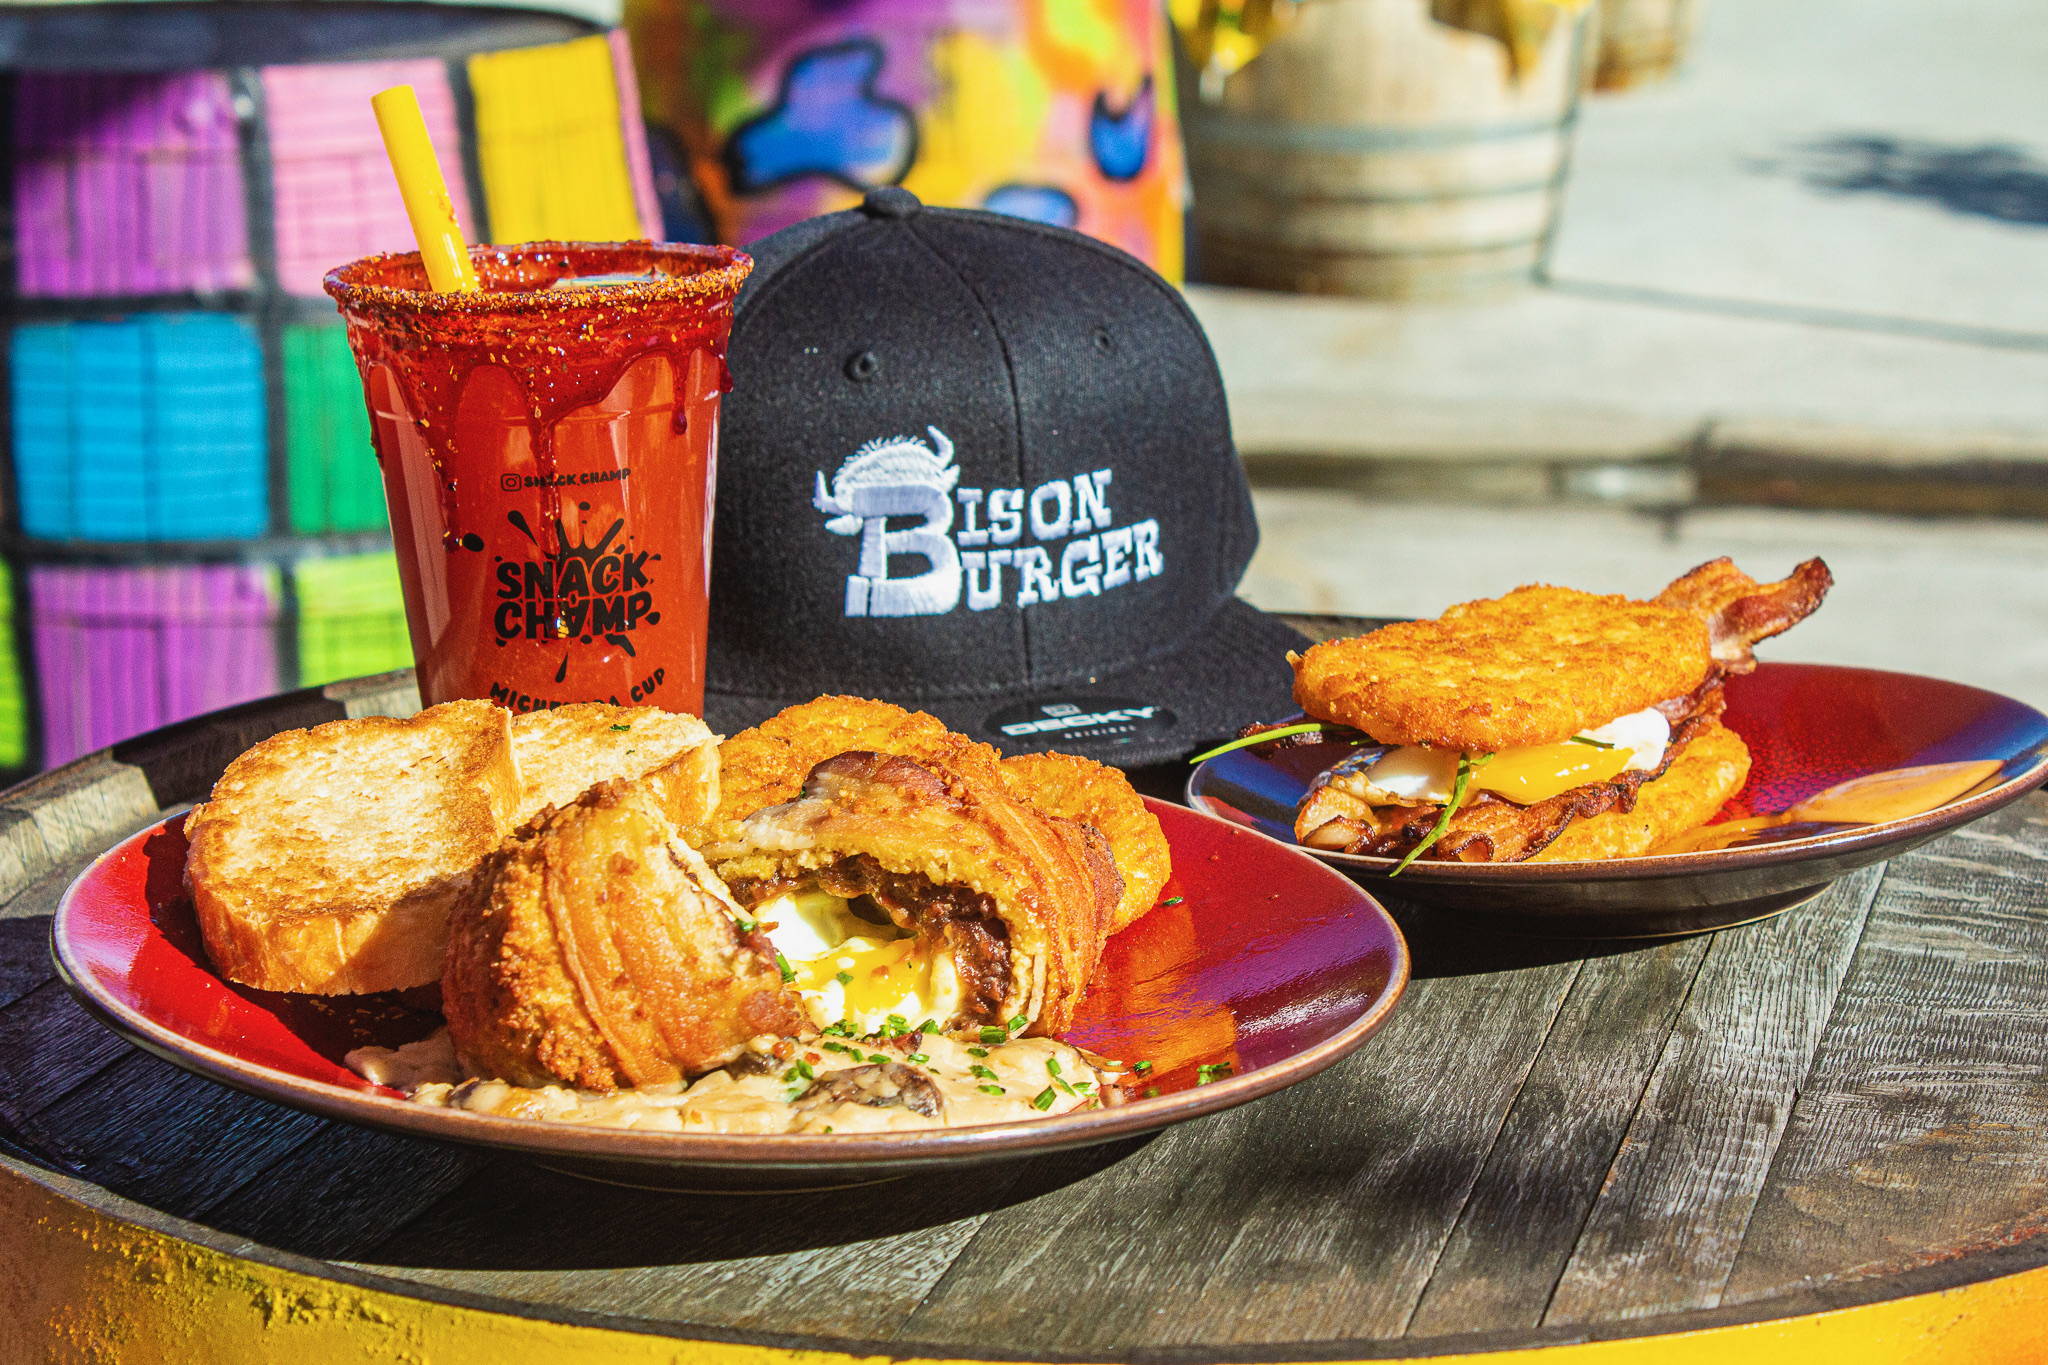 two plates of brunch food with a Snack Champ michelada and a black flat bill hat with Bison Burger logo embroidered in white